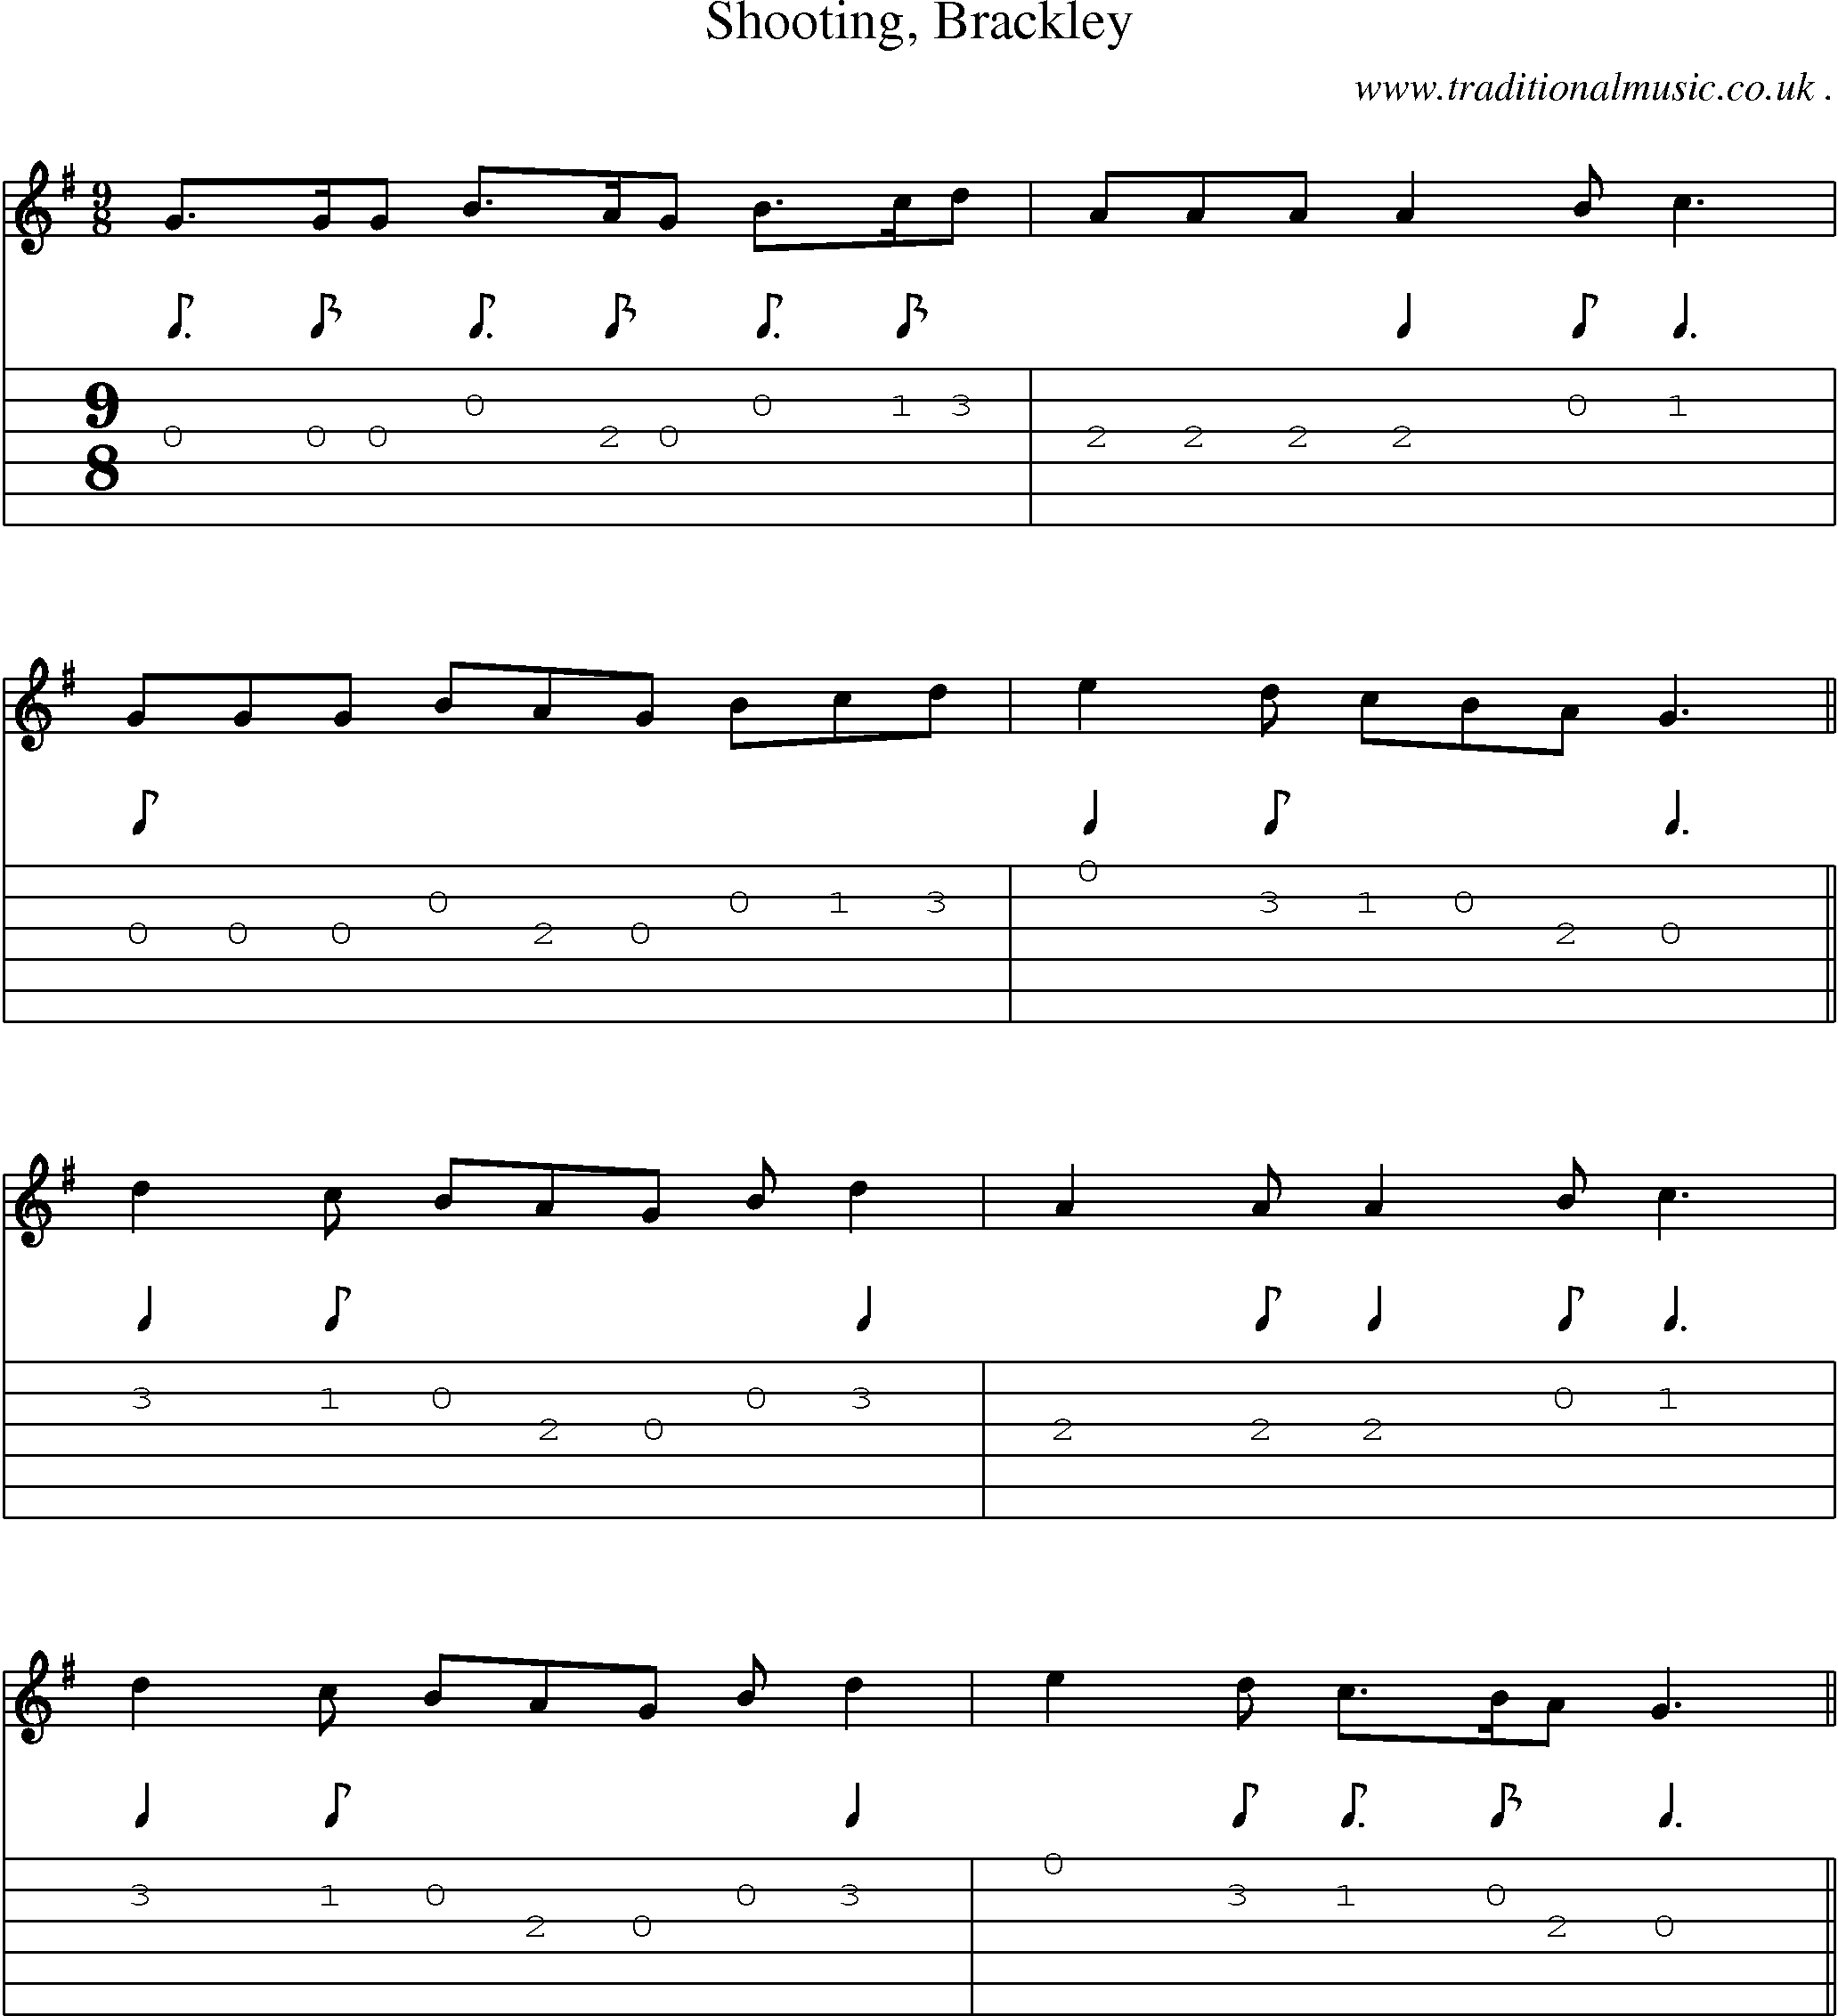 Sheet-Music and Guitar Tabs for Shooting Brackley